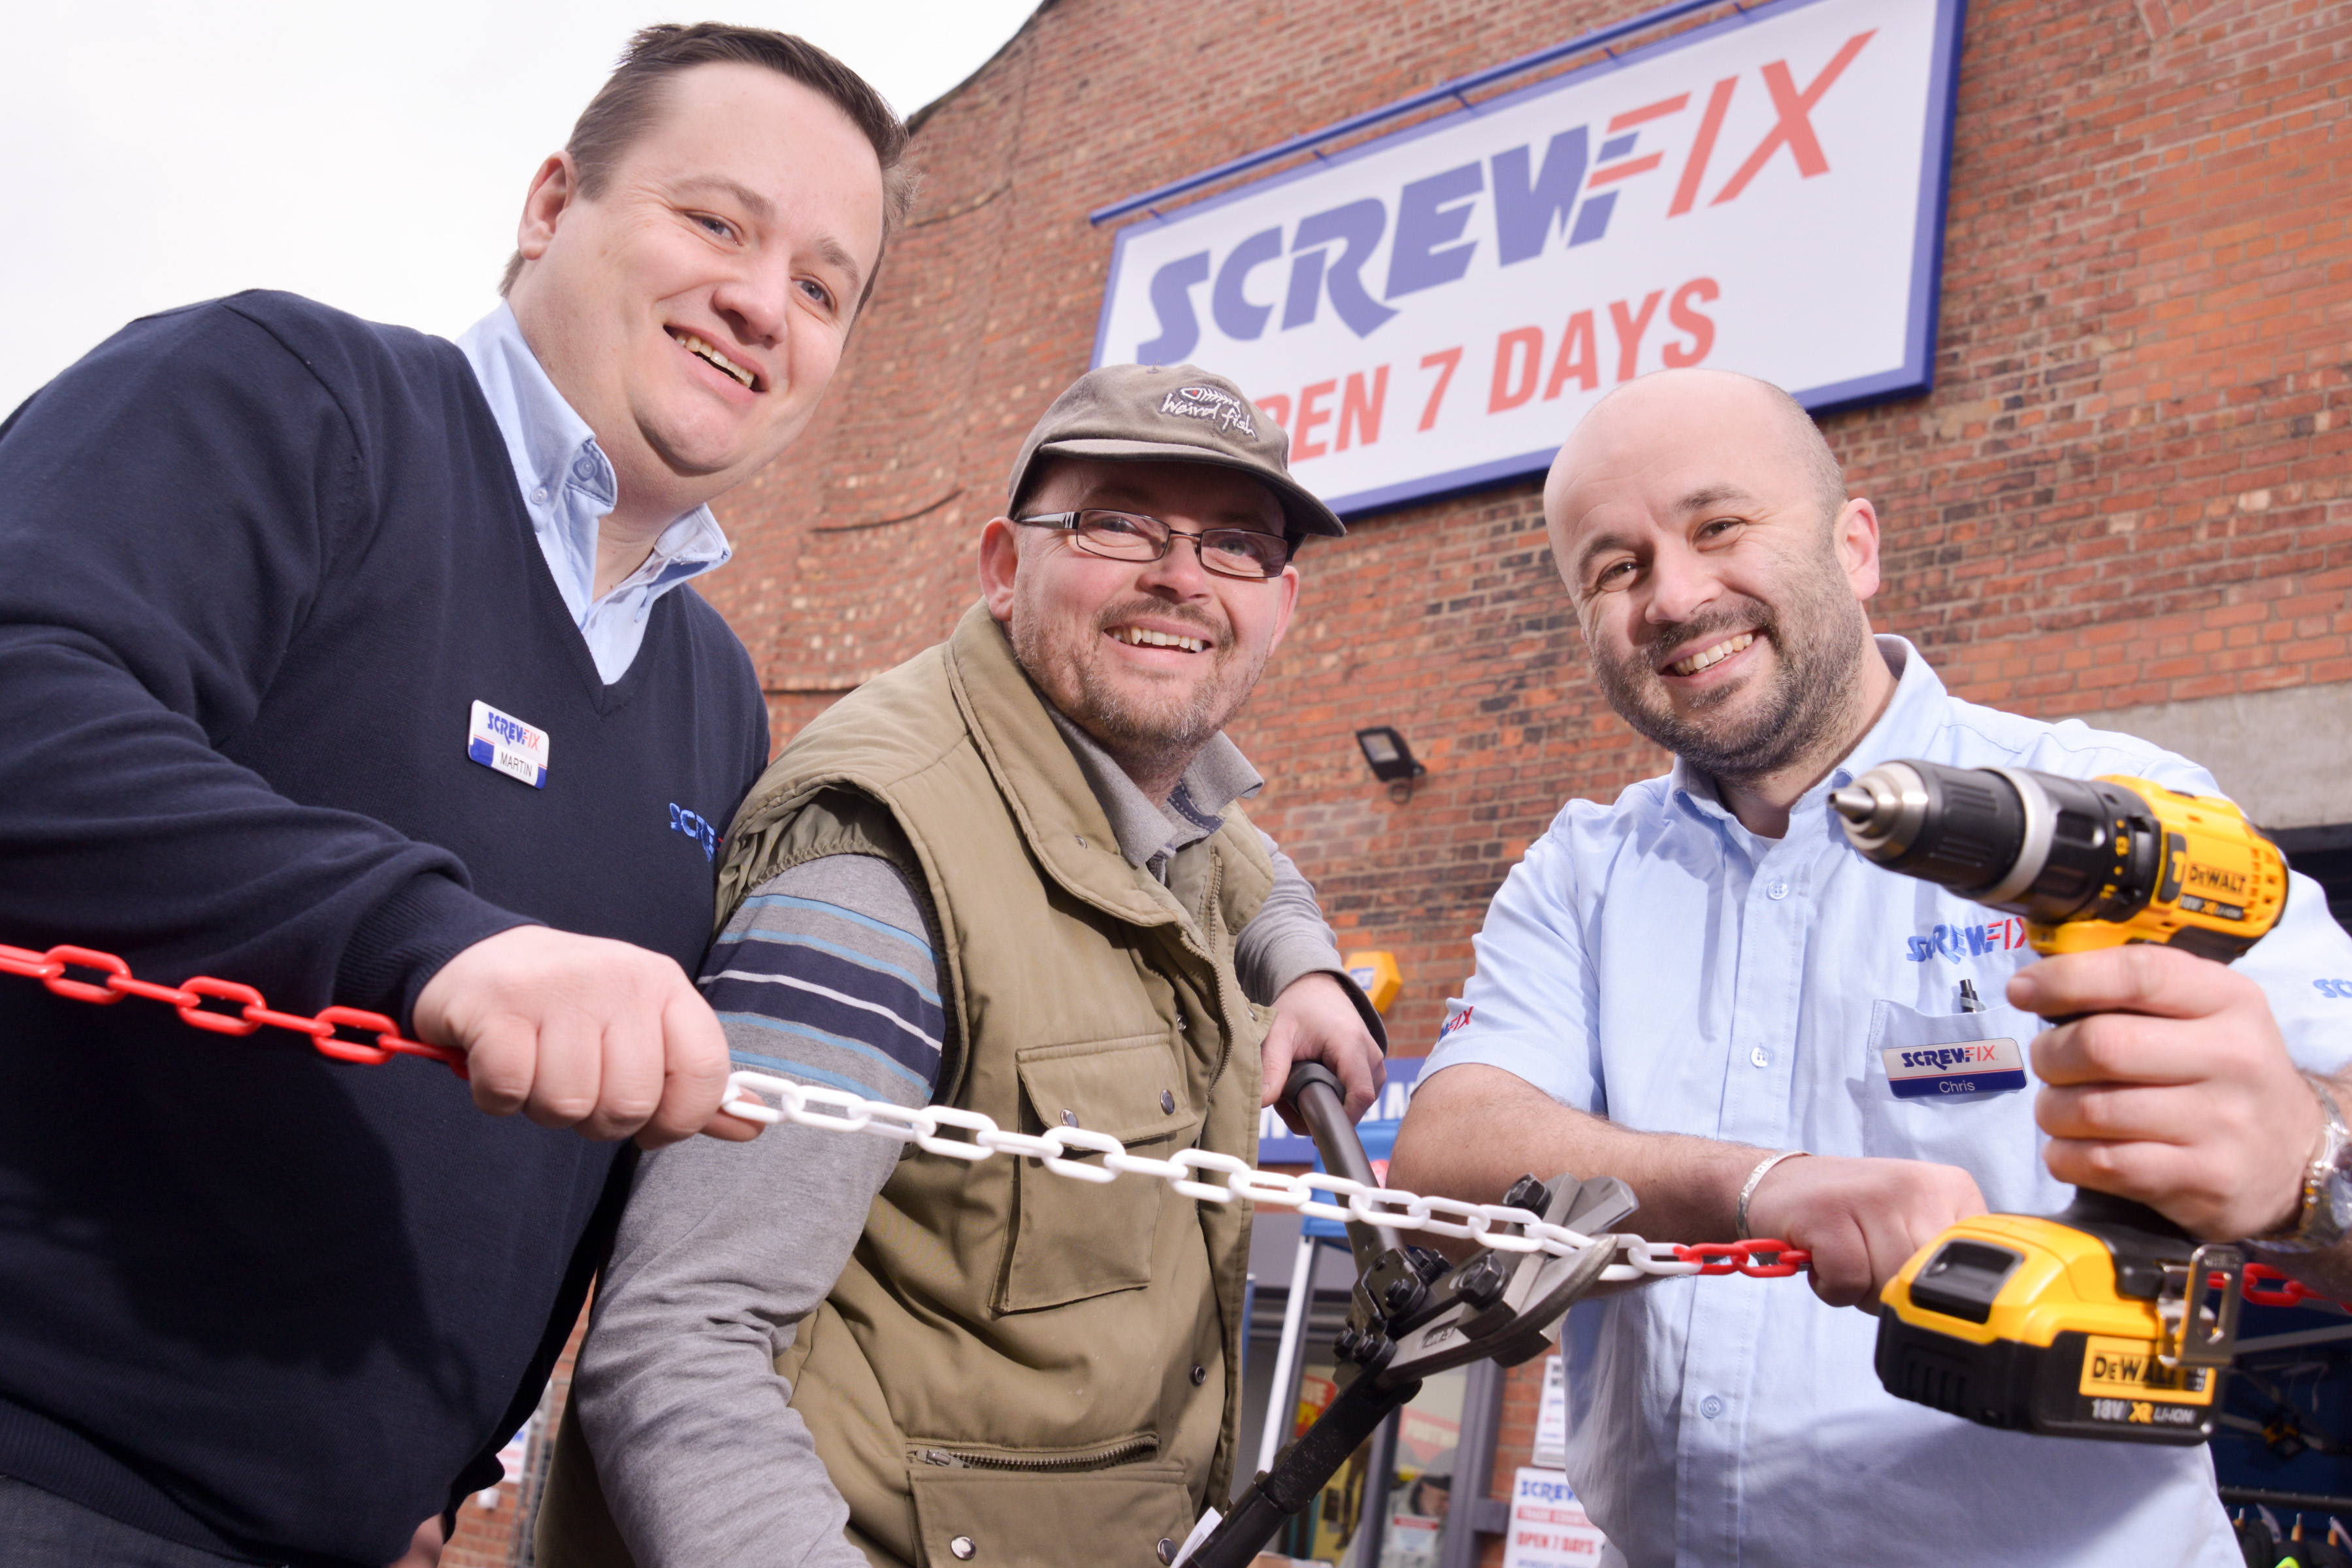 Leyland’s first Screwfix store is declared a runaway success